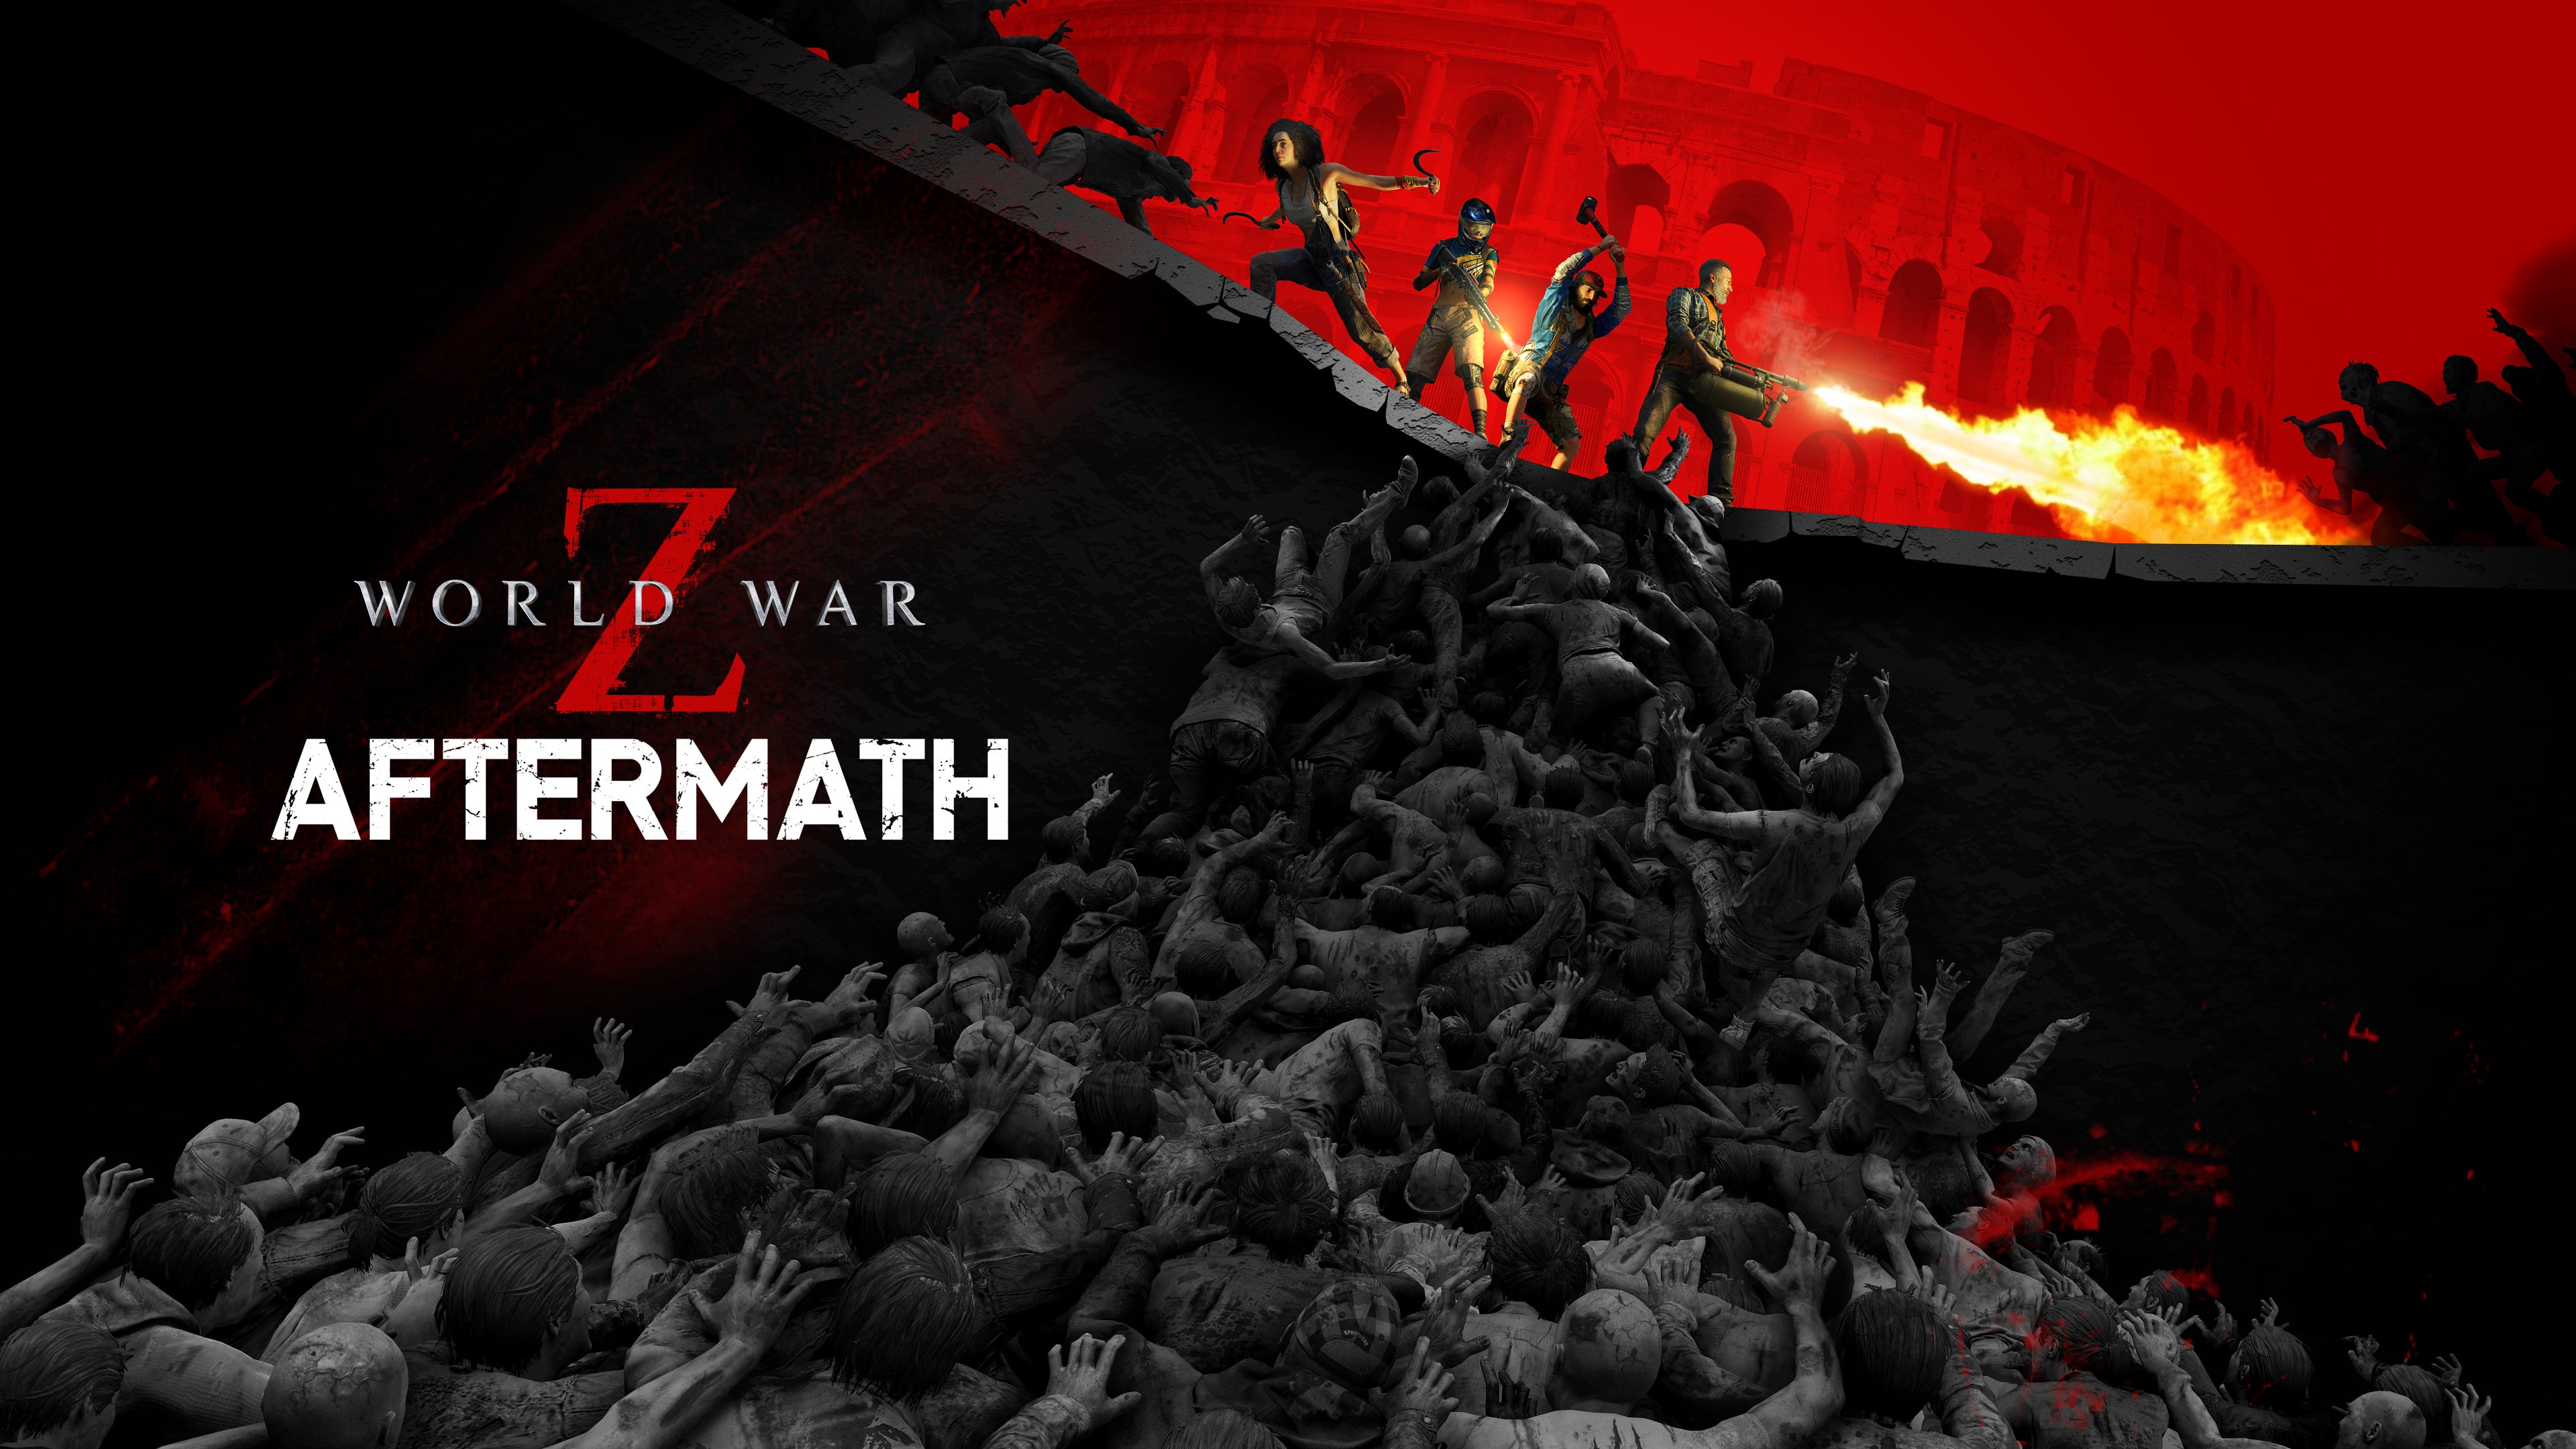 World War Z: Aftermath (Simplified Chinese, English, Korean, Traditional Chinese)